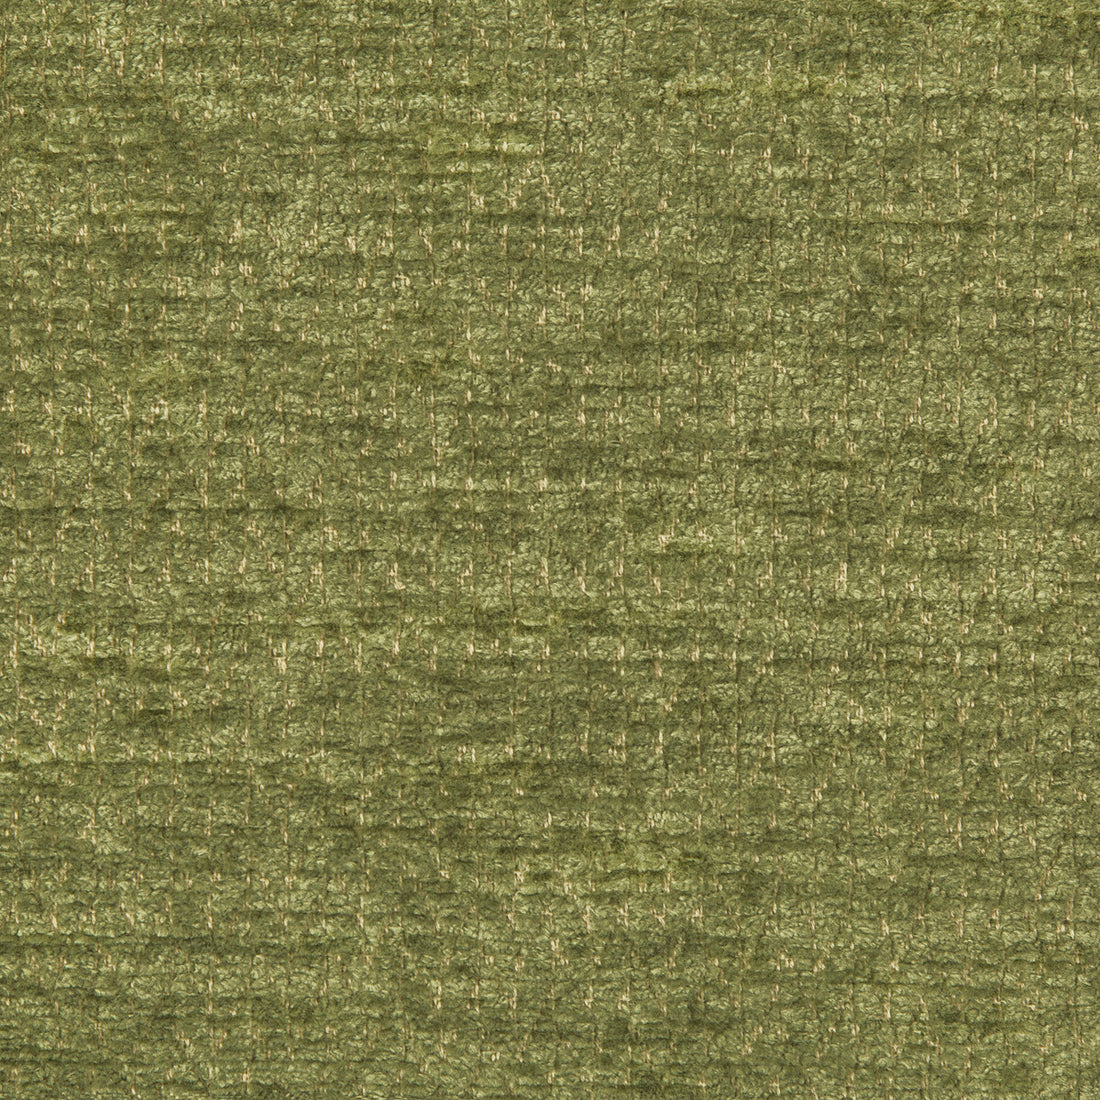 Cassien Texture fabric in avocado color - pattern 8019146.3.0 - by Brunschwig &amp; Fils in the Chambery Textures II collection